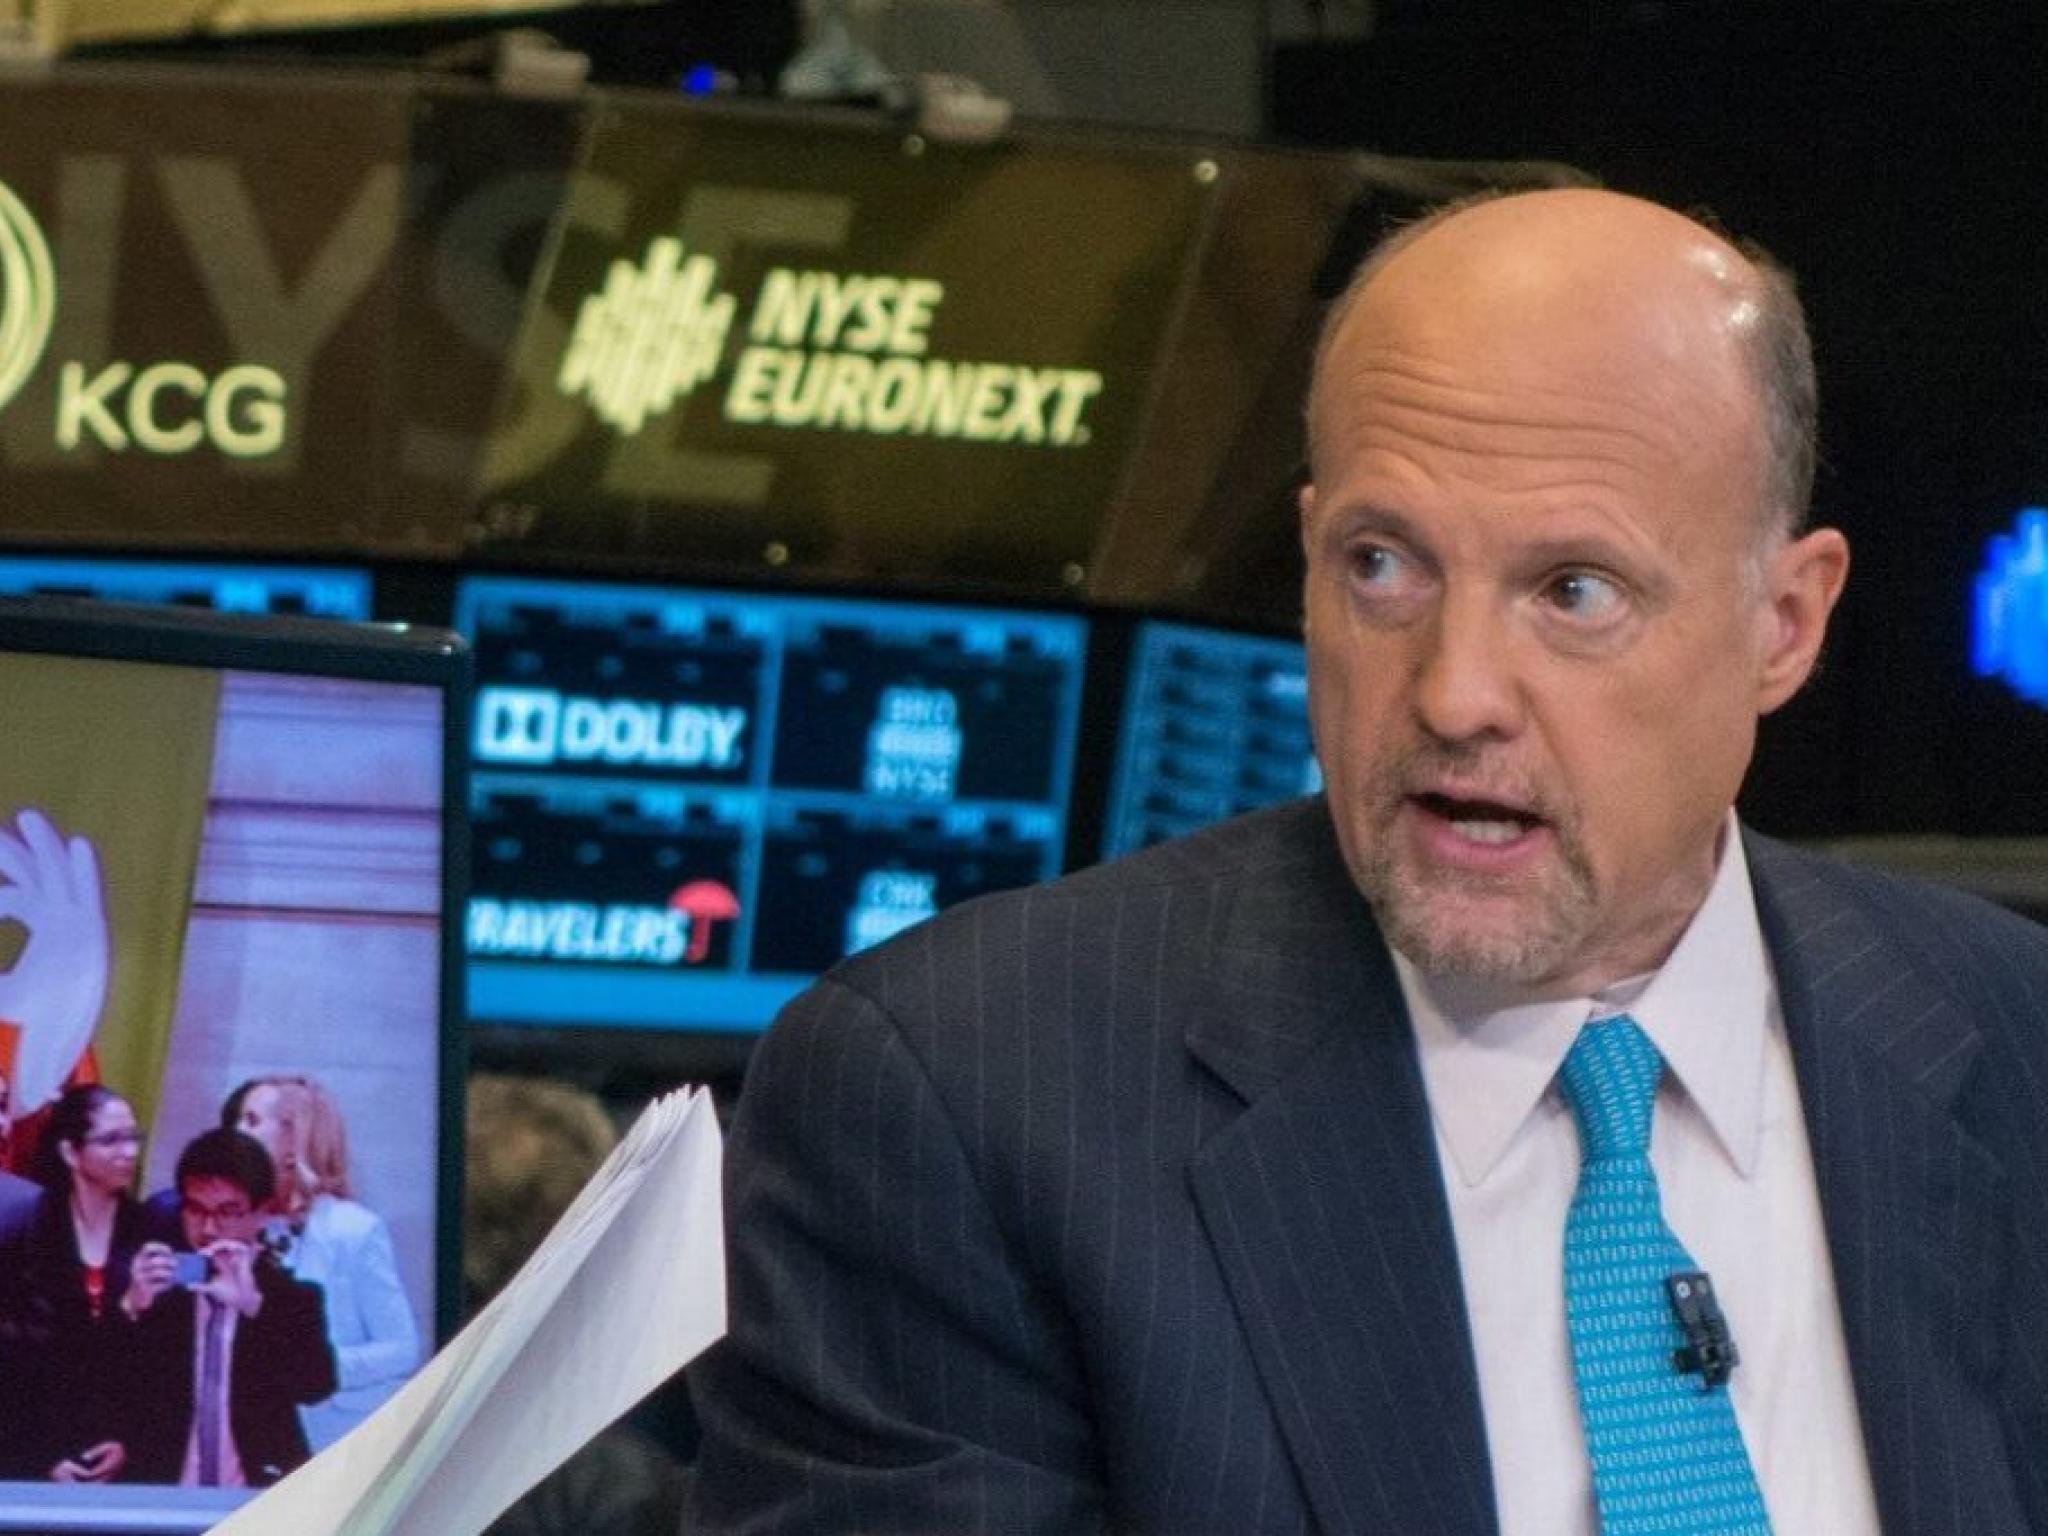  jim-cramer-weighs-in-ahead-of-apple-amazon-eli-lilly-earnings-we-have-to-run-such-a-ridiculous-gauntlet-next-week 